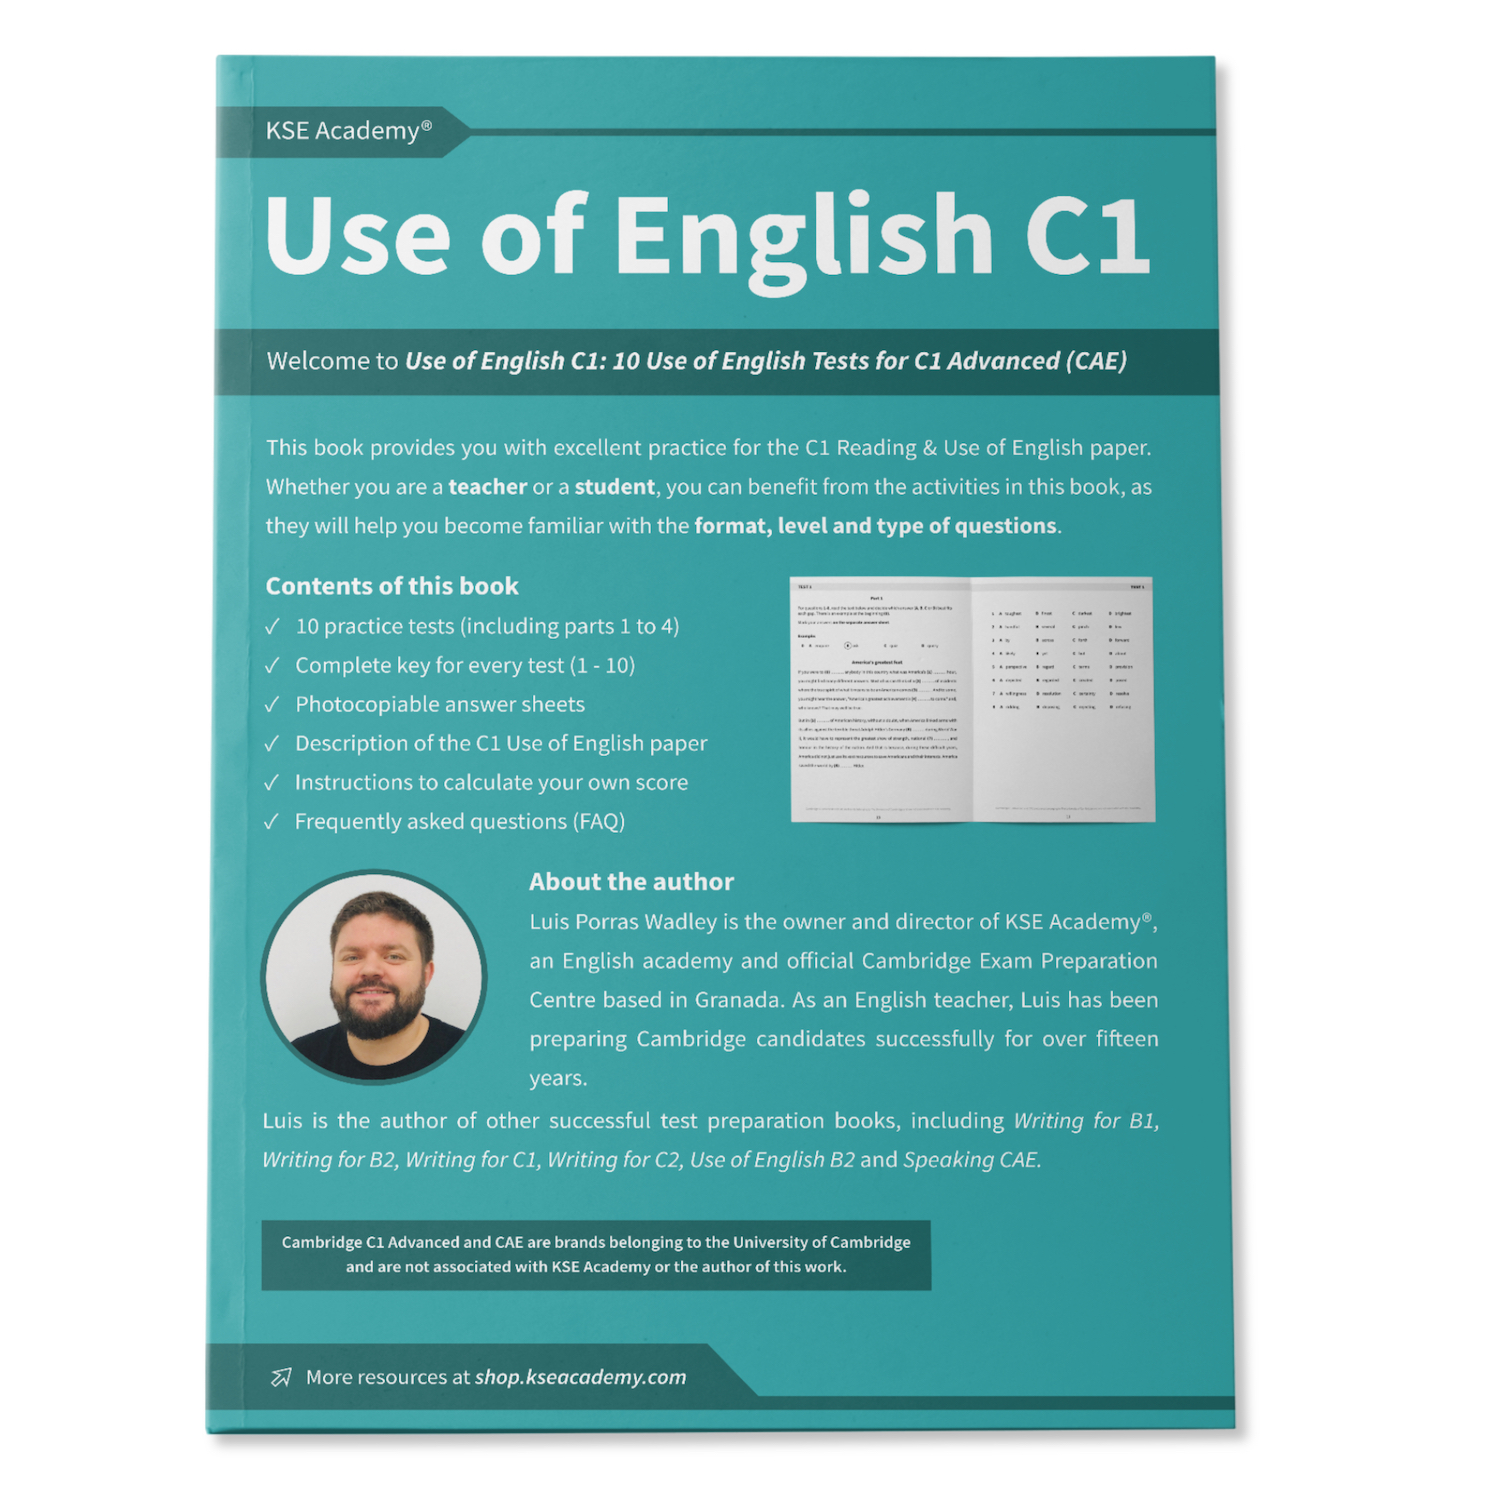 Use of English C1: 10 Practice Tests for C1 Advanced (Vol. 2)